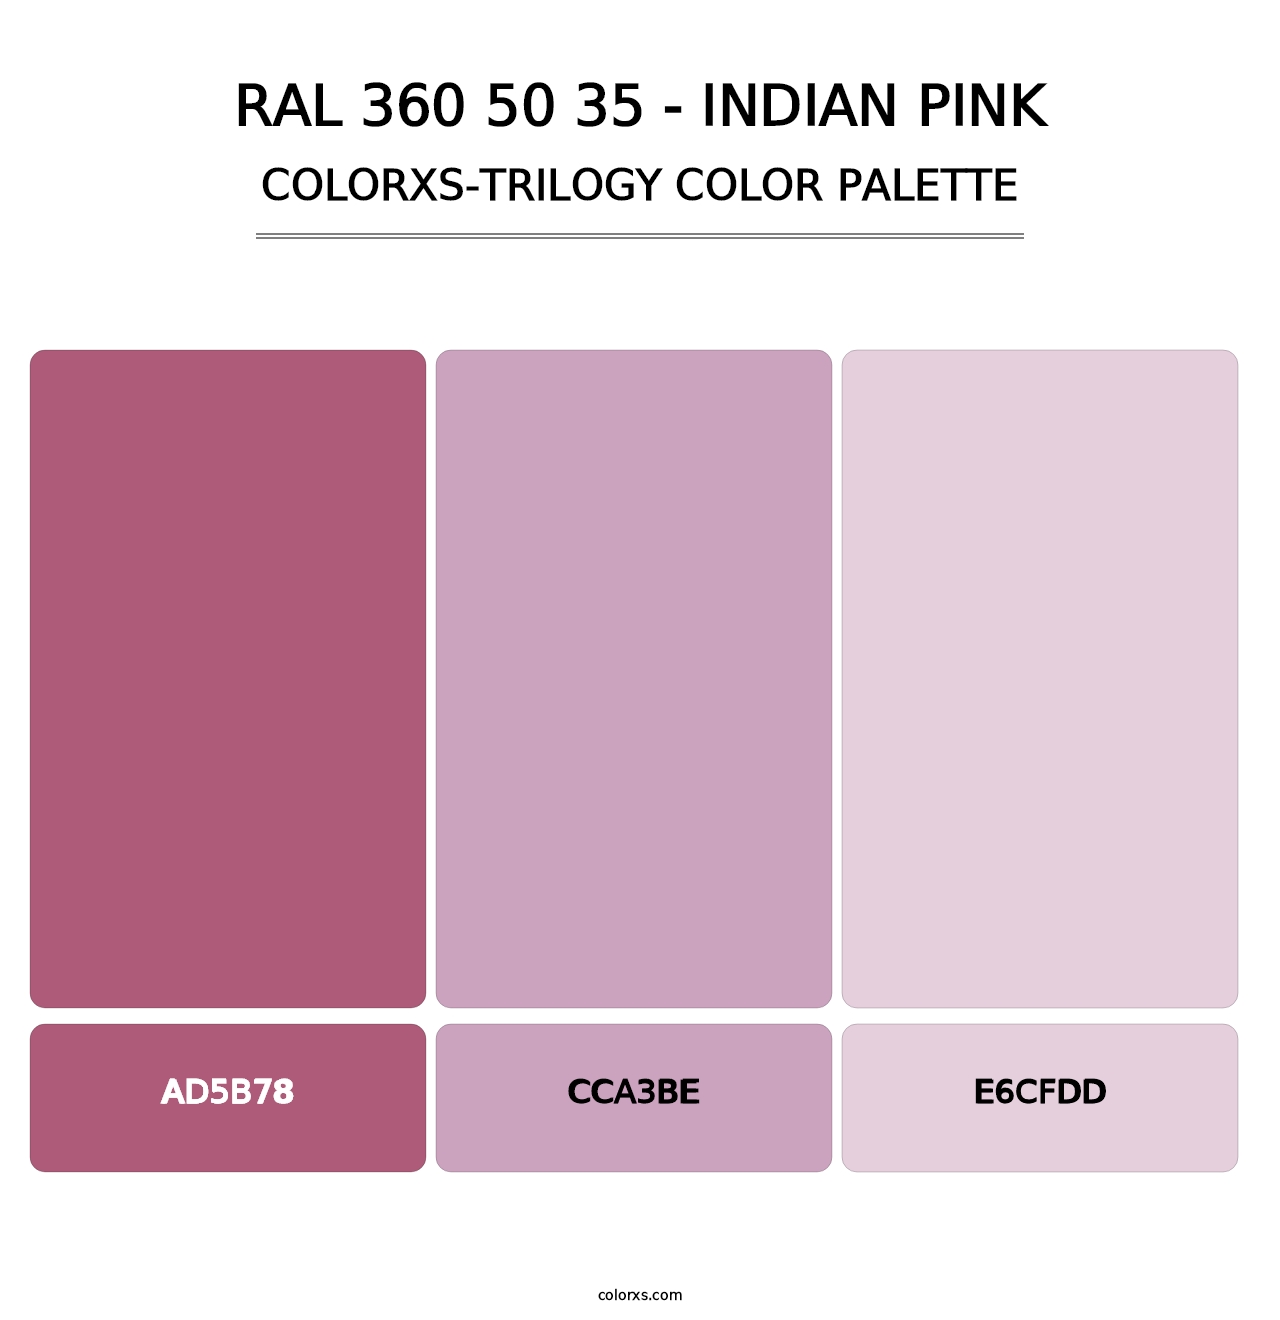 RAL 360 50 35 - Indian Pink - Colorxs Trilogy Palette